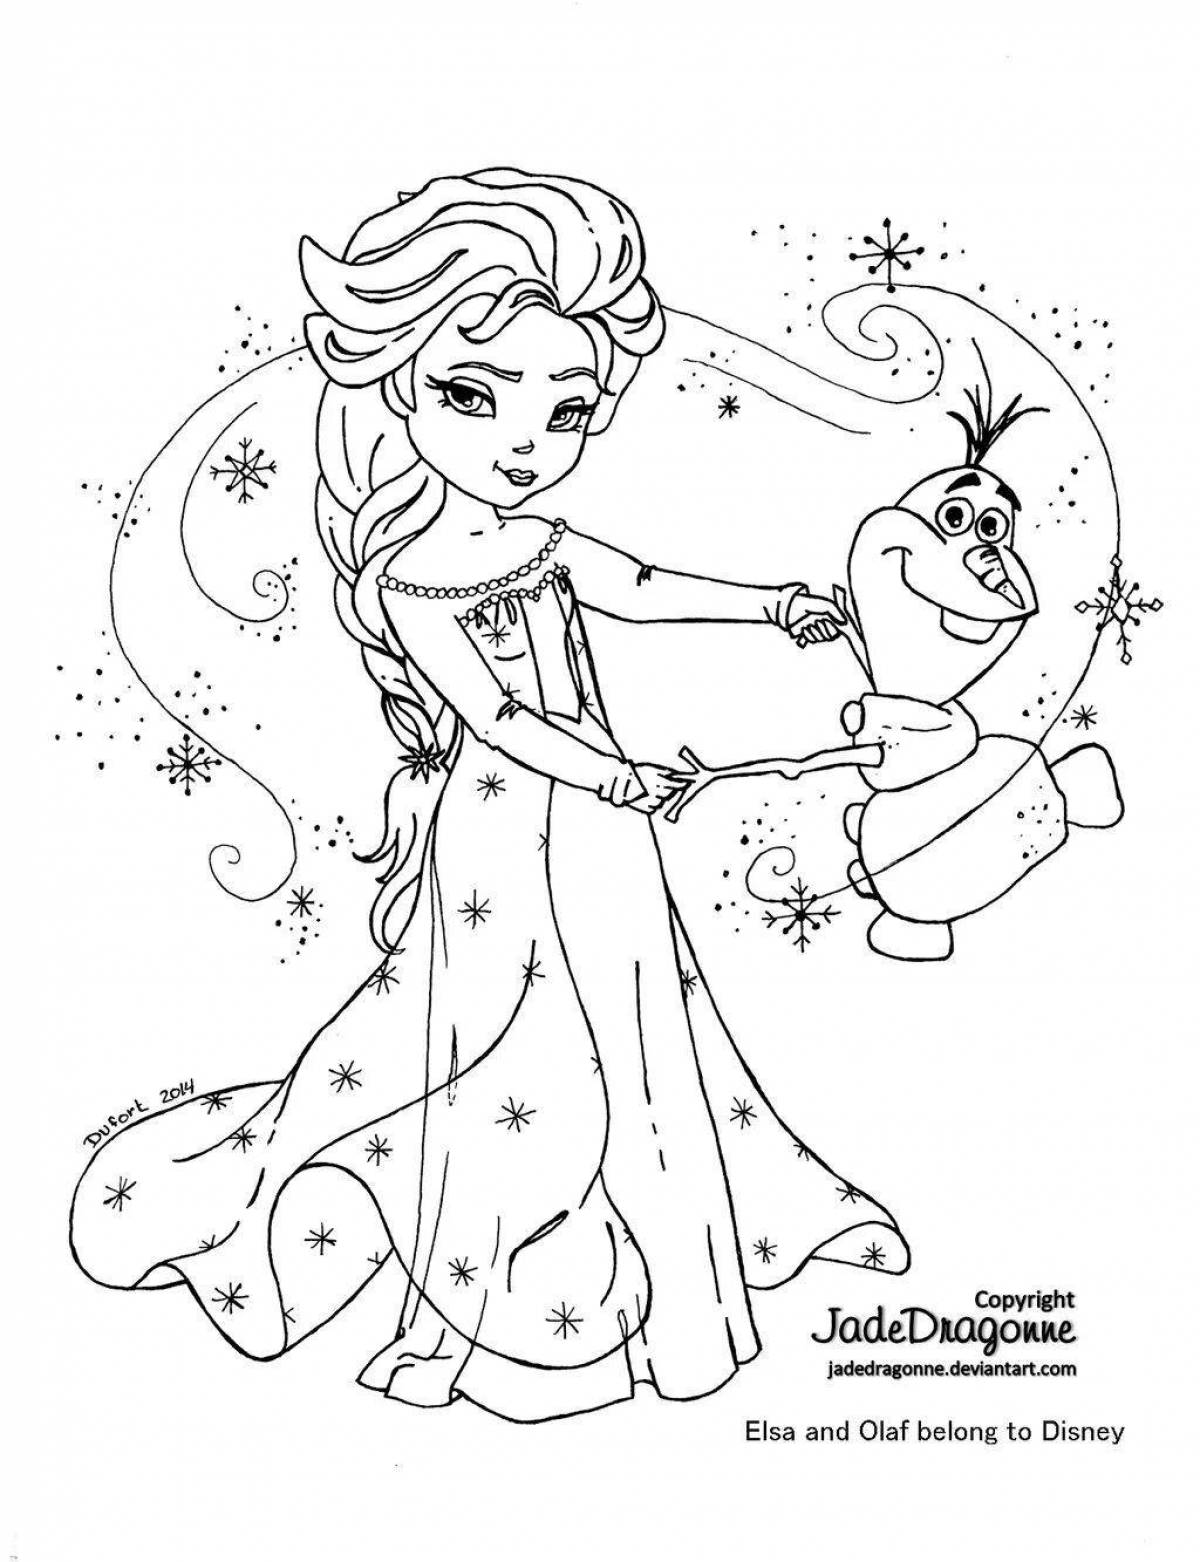 Whimsical Frozen coloring book for 6-7 year olds